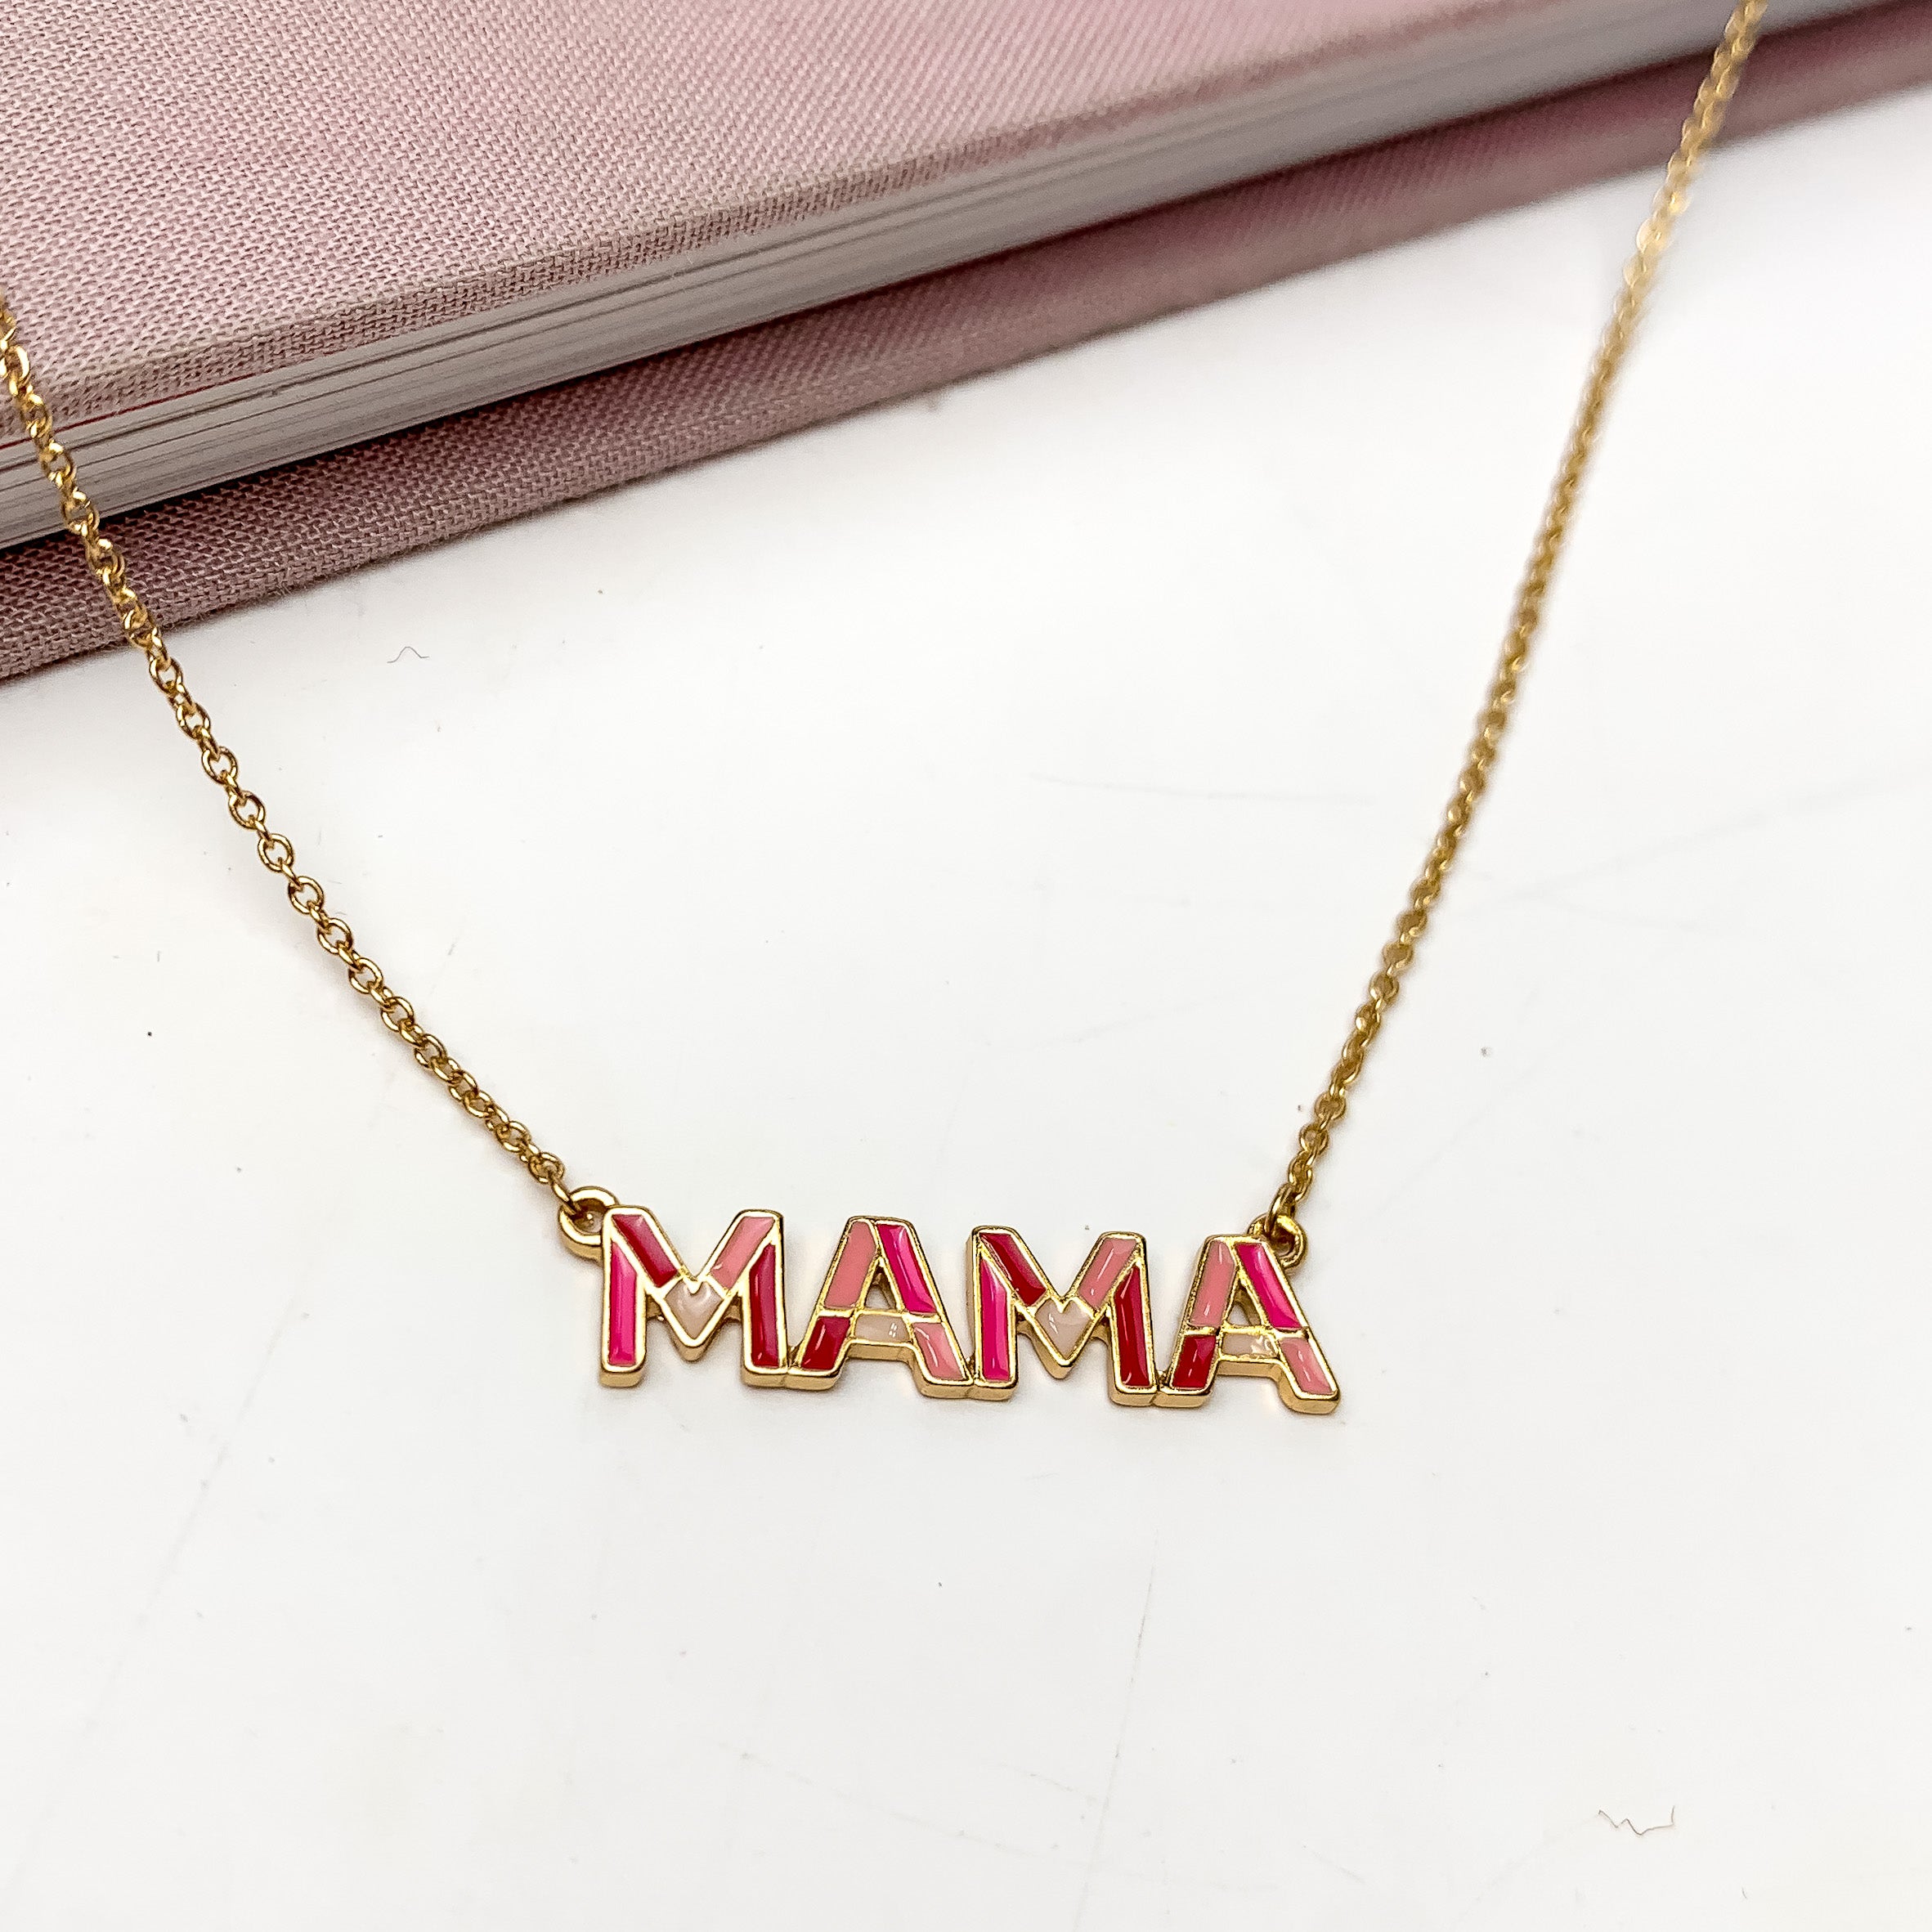 Mama Chain Necklace in Gold Tone With Pink Tones - Giddy Up Glamour Boutique